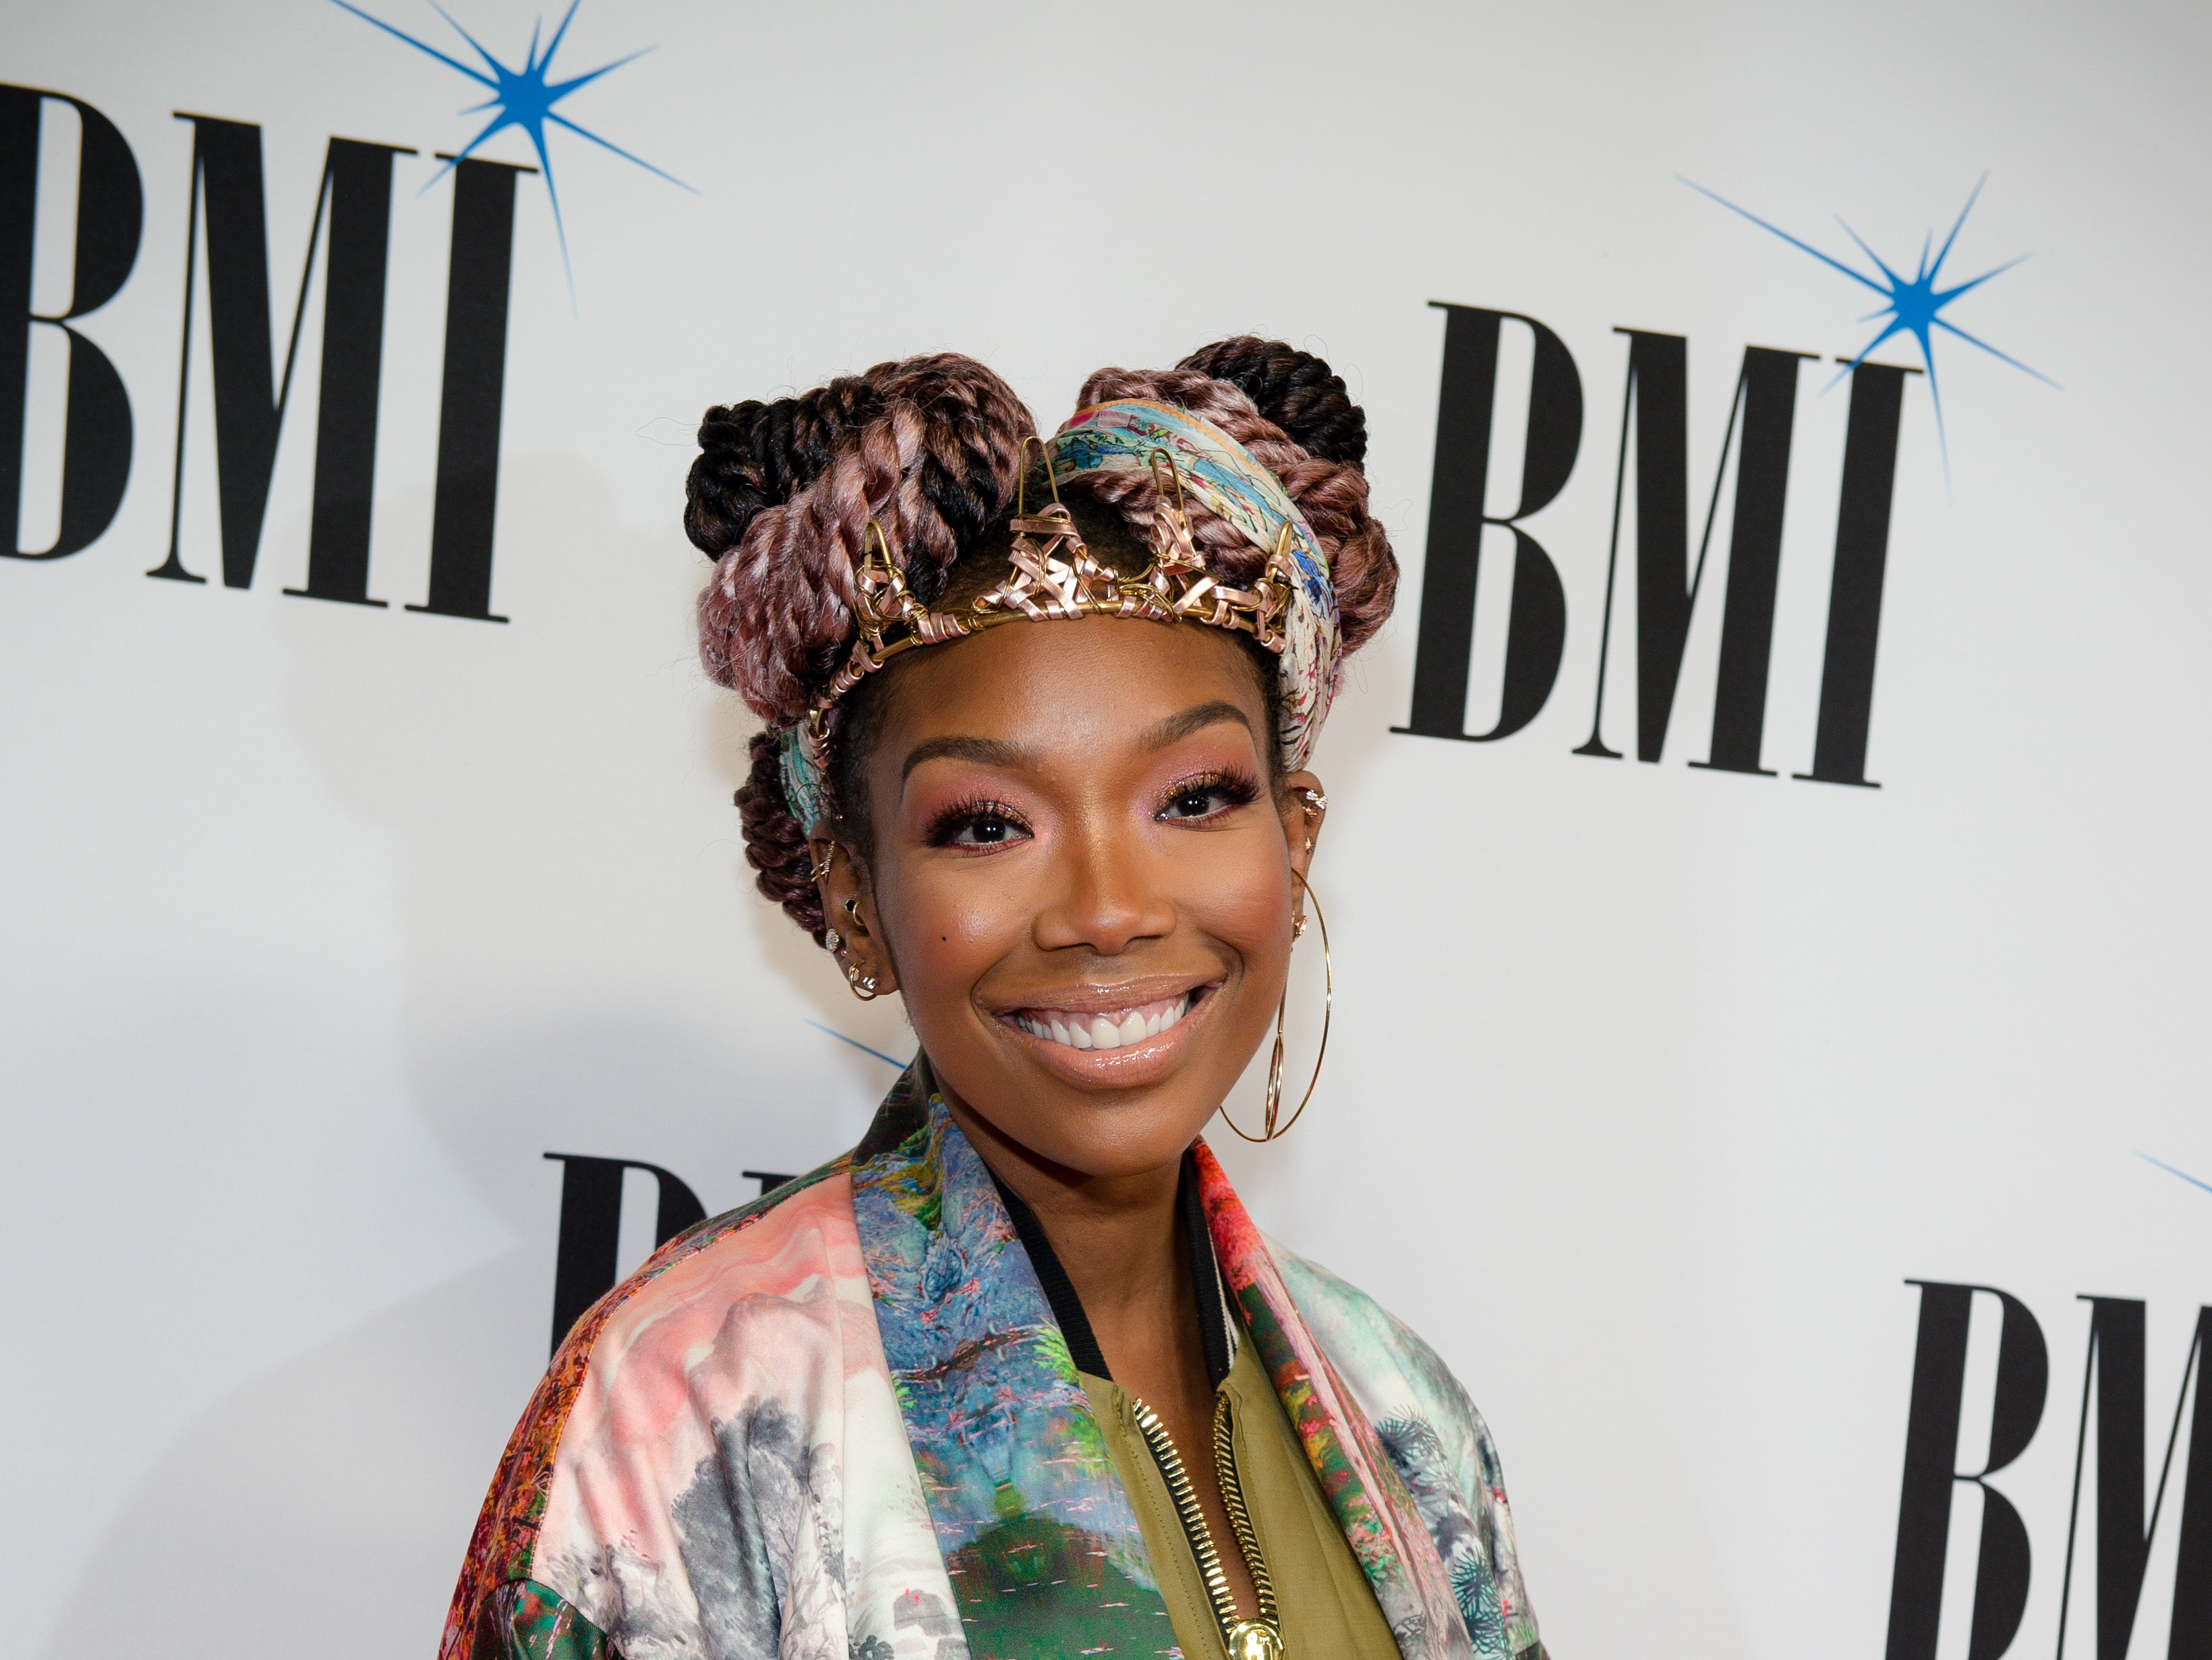 Brandy attends the 2019 BMI R&B/Hip-Hop Awards on August 29, 2019 in Sandy Springs, Georgia. (Photo by Marcus Ingram/Getty Images)